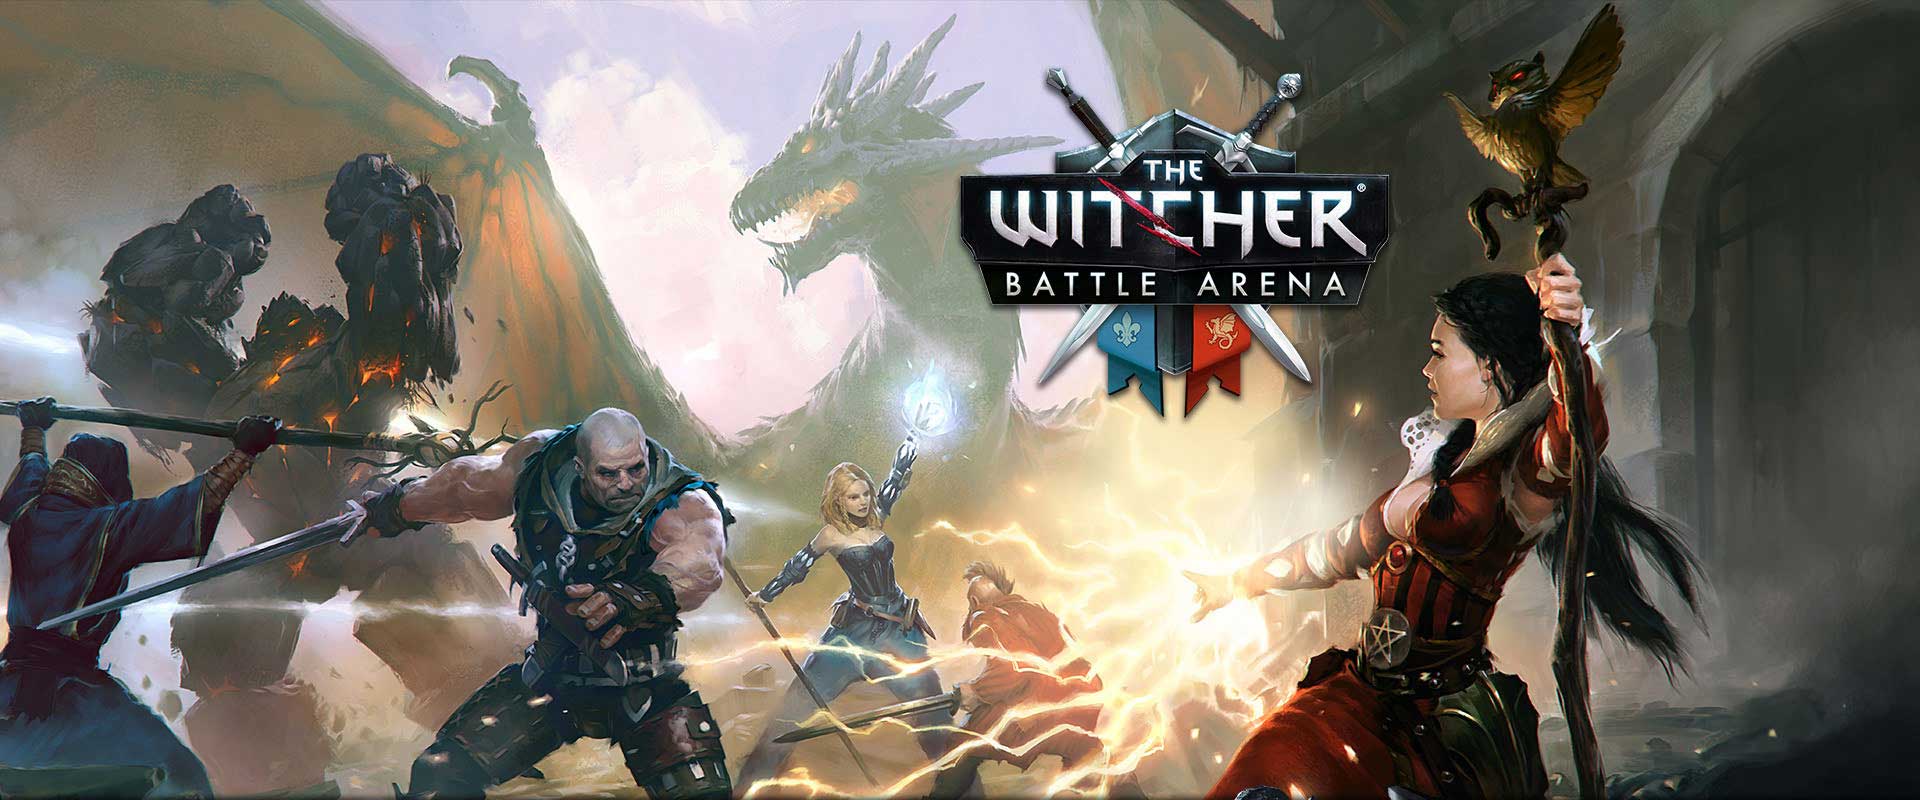 The Witcher: Battle Arena #20